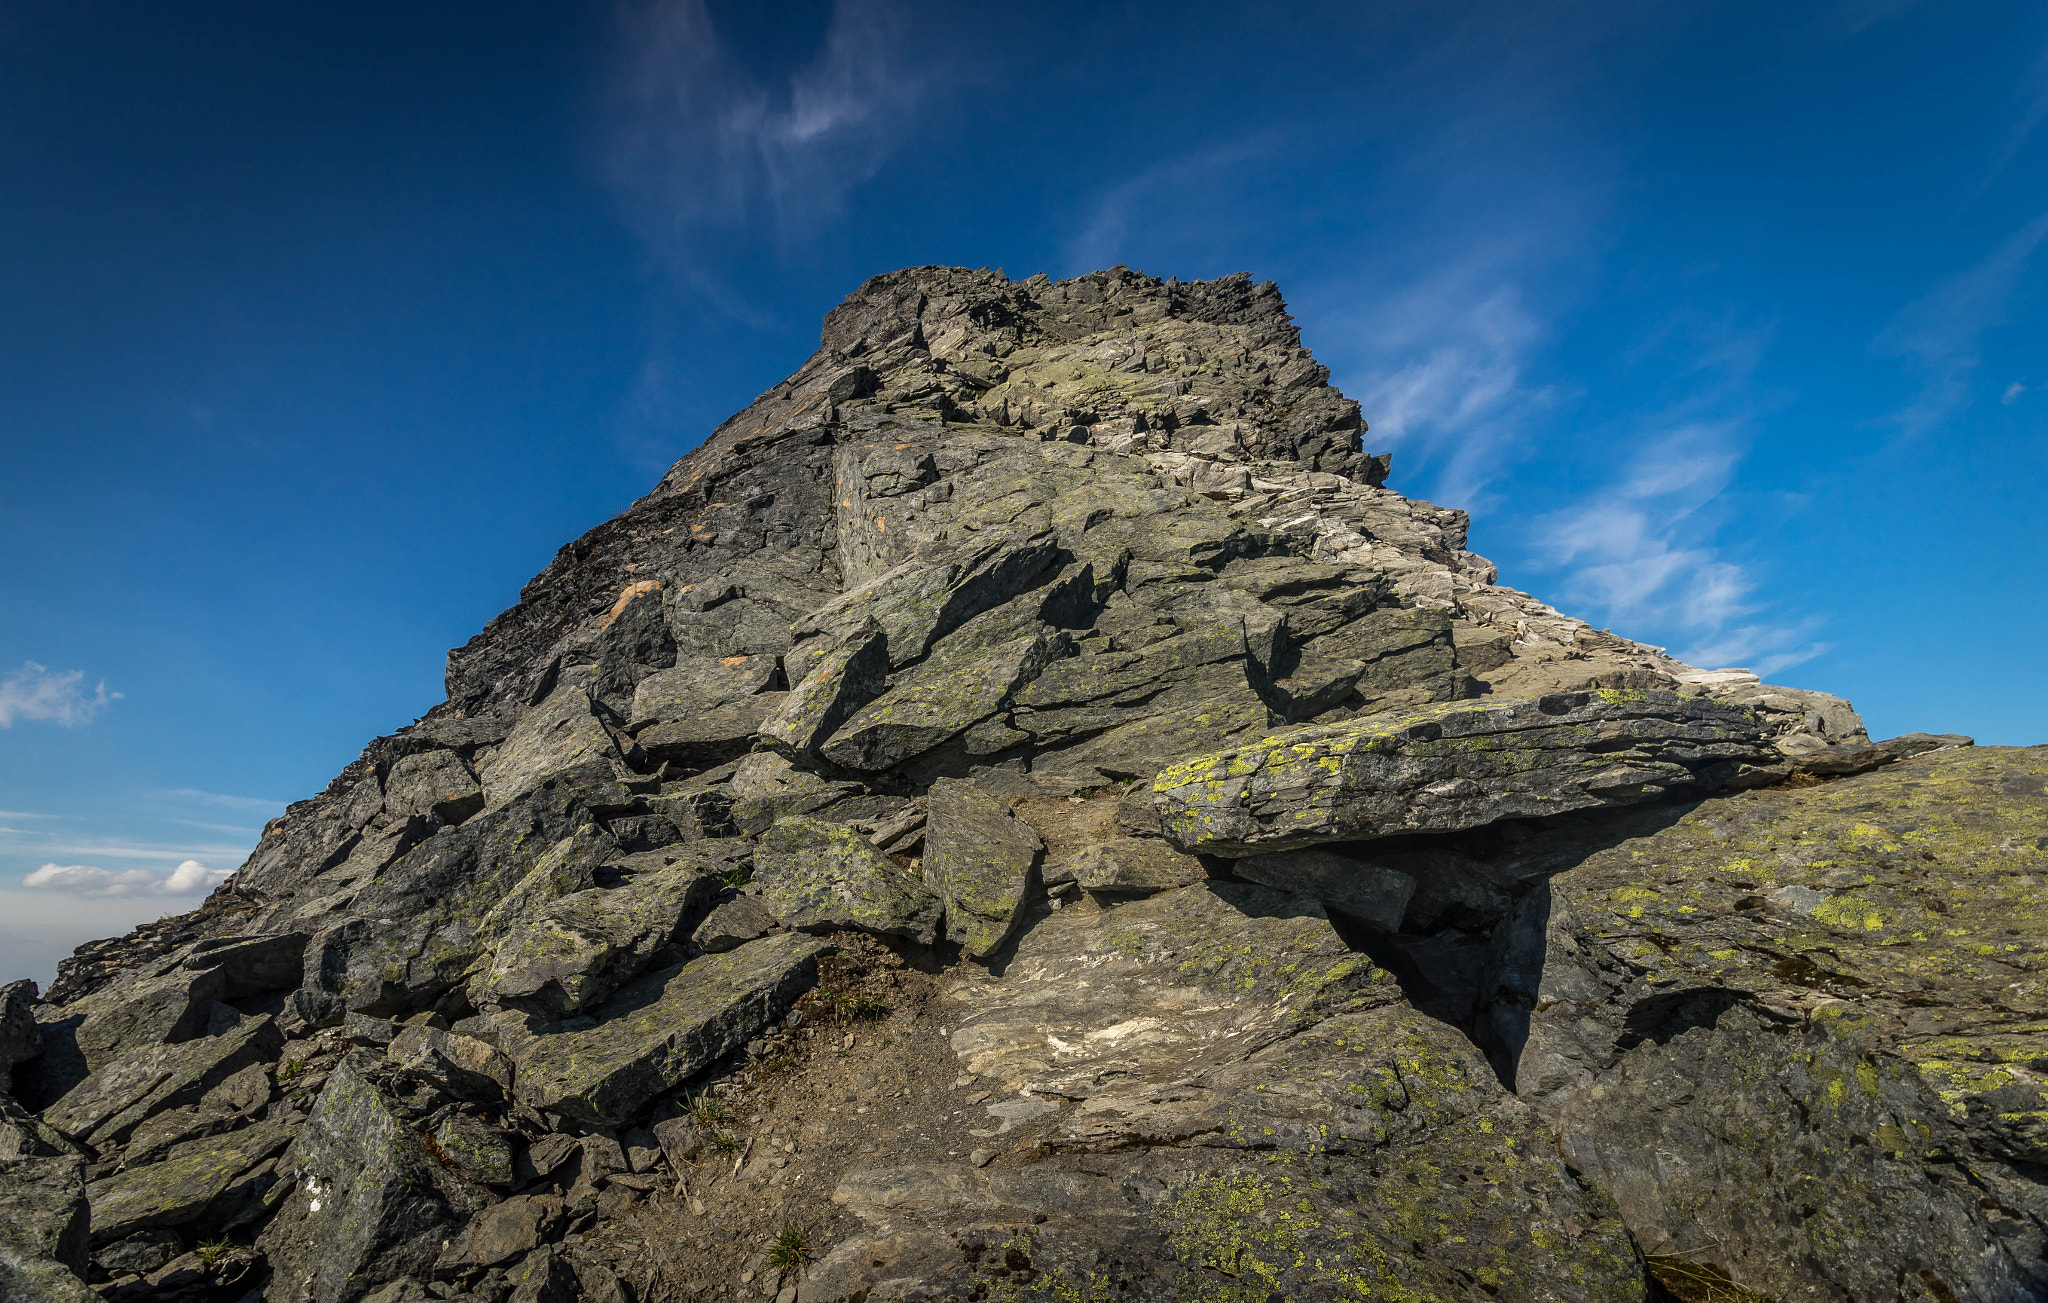 Sony a7 II sample photo. Slogen. the final scramble for the summit. photography